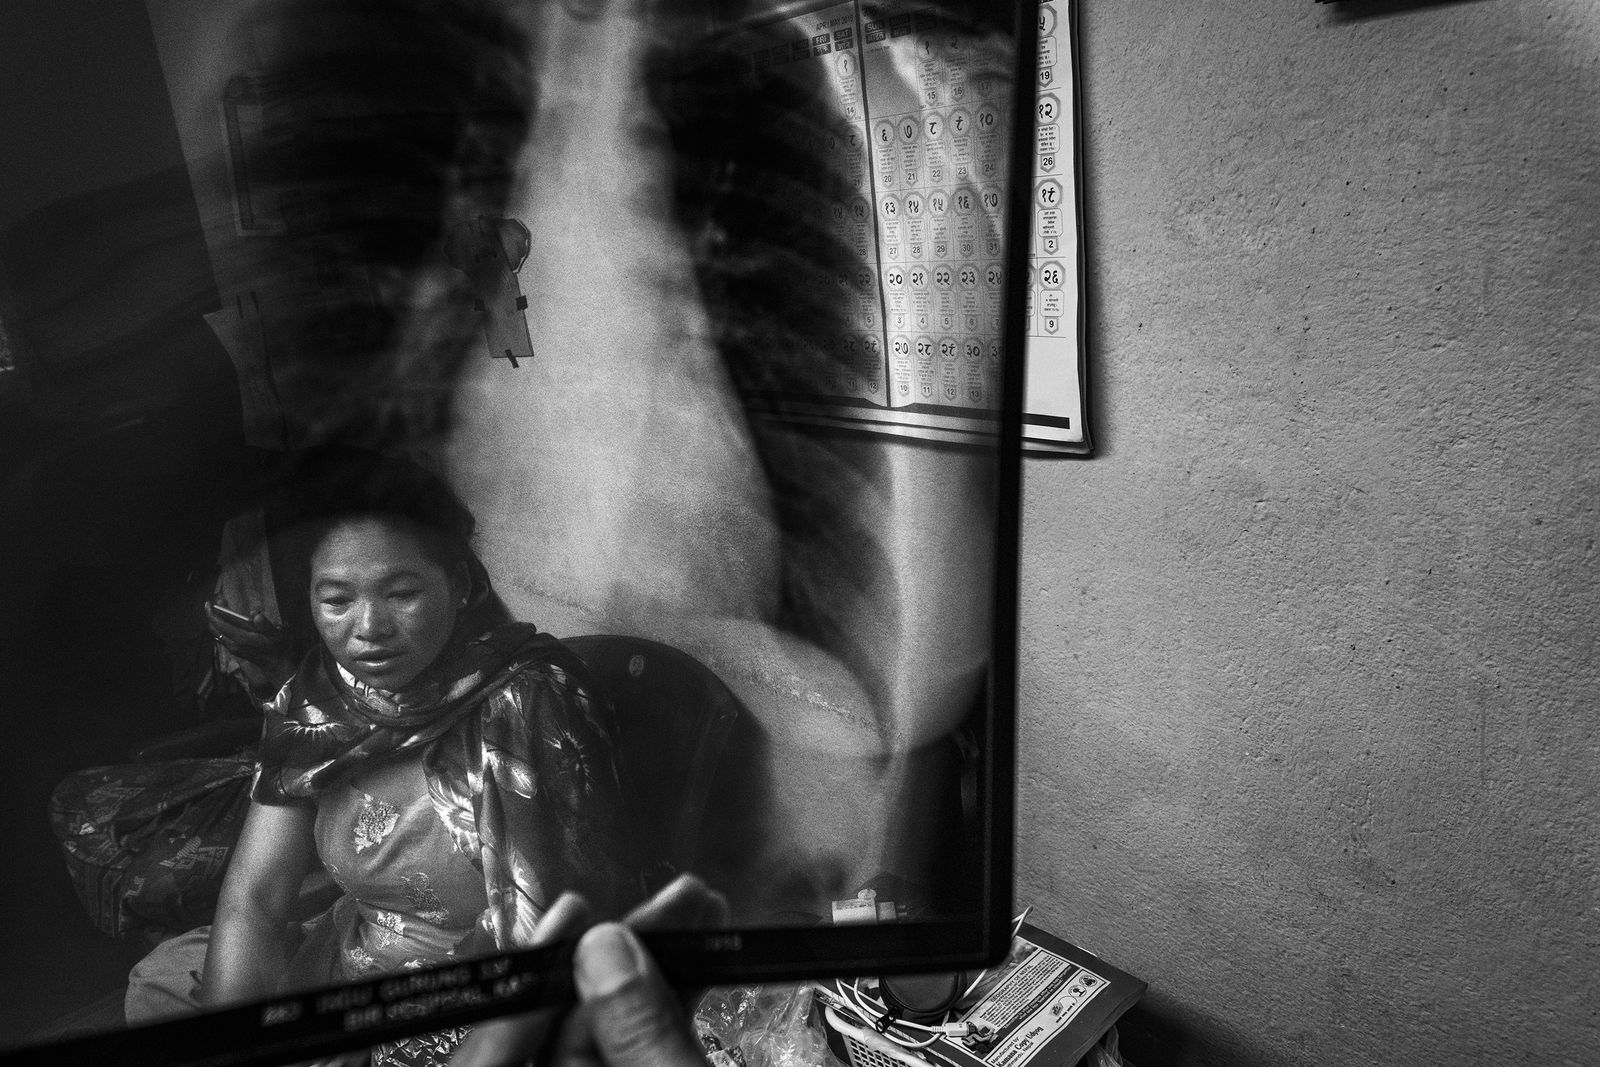 © Marco Sacco - Image from the Air Pollution, Kathmandu photography project